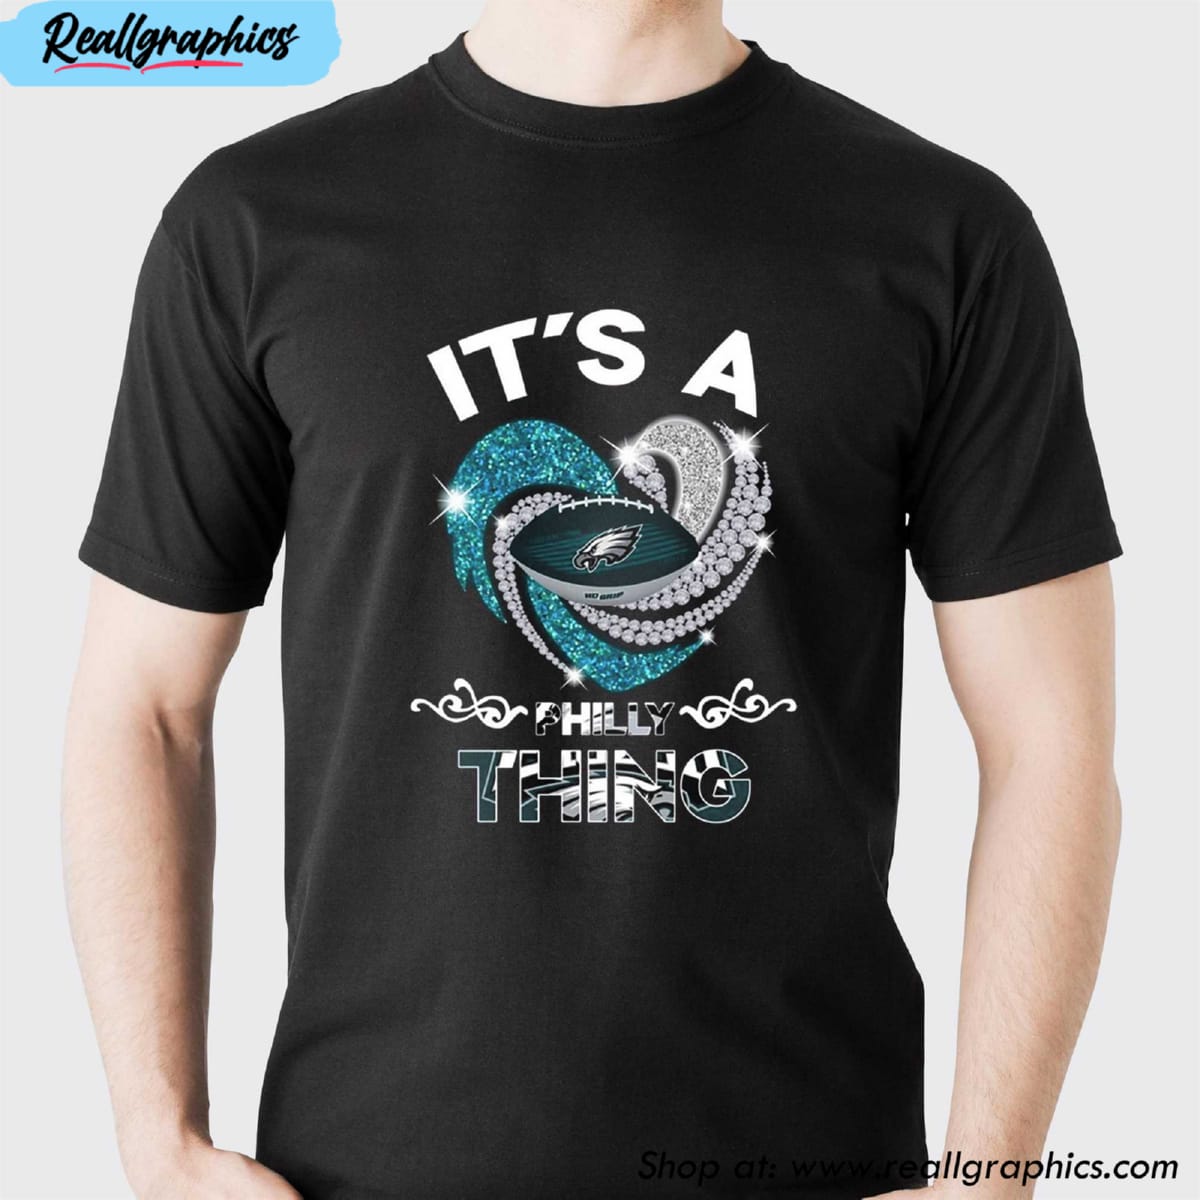 its a philly thing eagles shirt